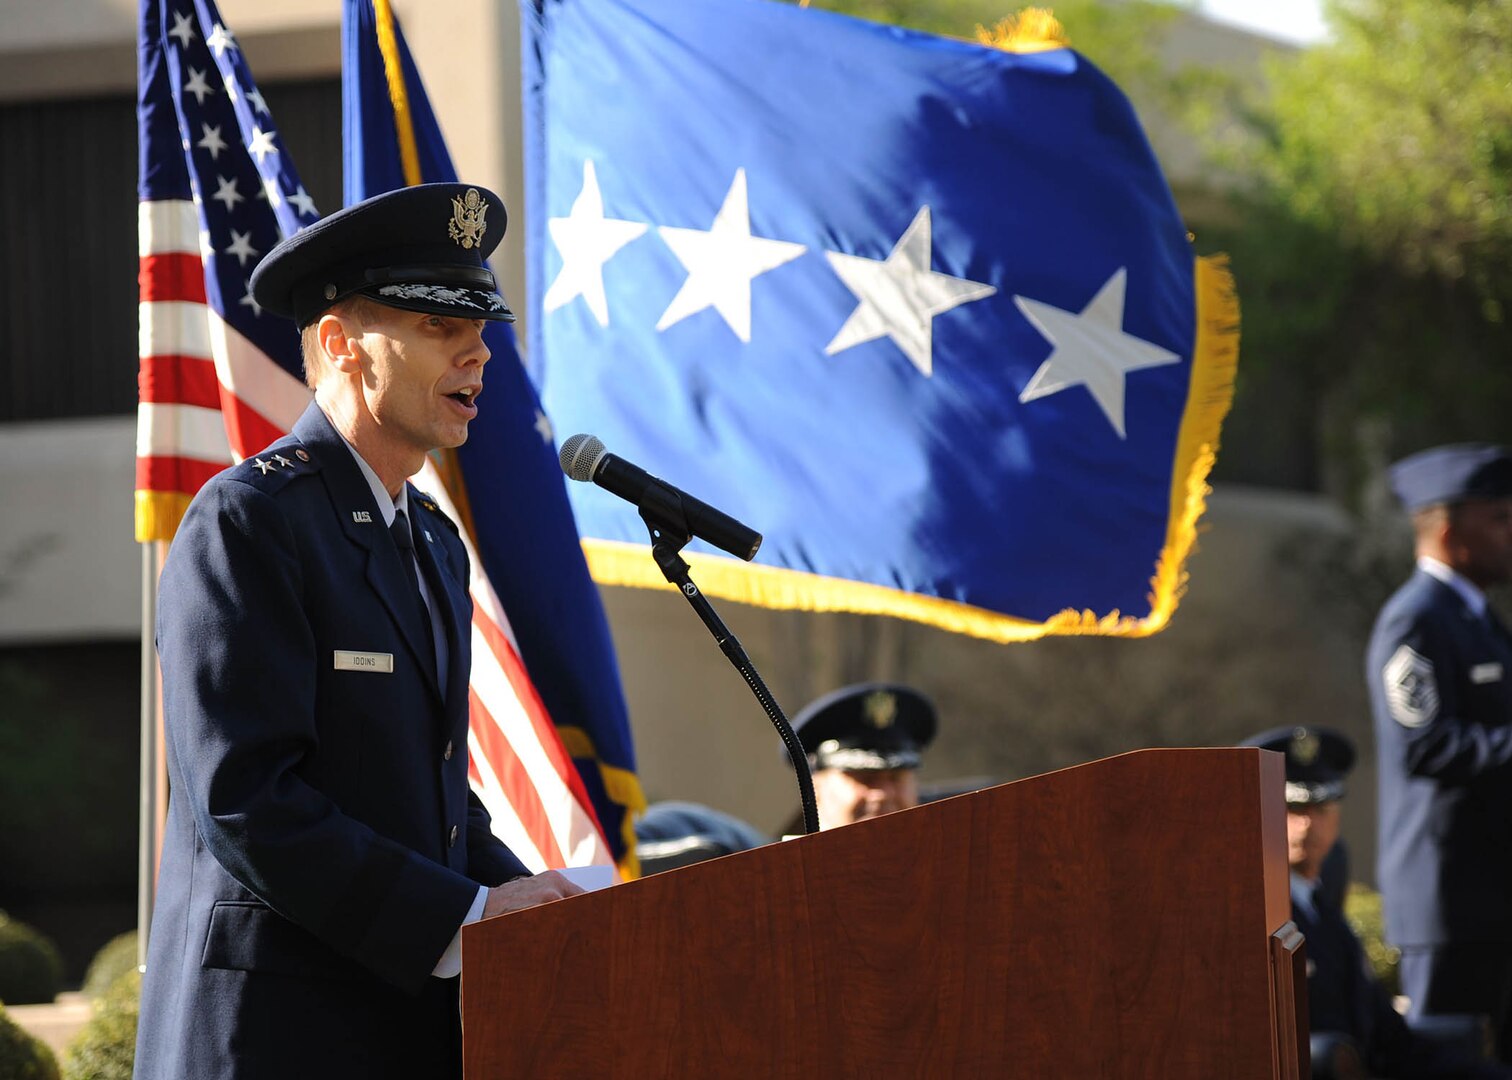 Maj. Gen. Bart Iddins, 59th Medical Wing commander and San Antonio Military Health System deputy market manager, addresses the audience after taking command of the unit during an April 10 ceremony at the Wilford Hall Ambulatory Surgical Center, Joint Base San Antonio-Lackland, Texas. Iddins replaces a retiring Maj. Gen. Byron Hepburn, who led the 59th MDW through its integration with Army medical services as part of the new San Antonio Military Health System. The 59th MDW is comprised of more than 6,000 personnel who provide medical services to nearly 240,000 beneficiaries in the San Antonio metropolitan area. (U.S. Air Force photo/Staff Sgt. Jerilyn Quintanilla)